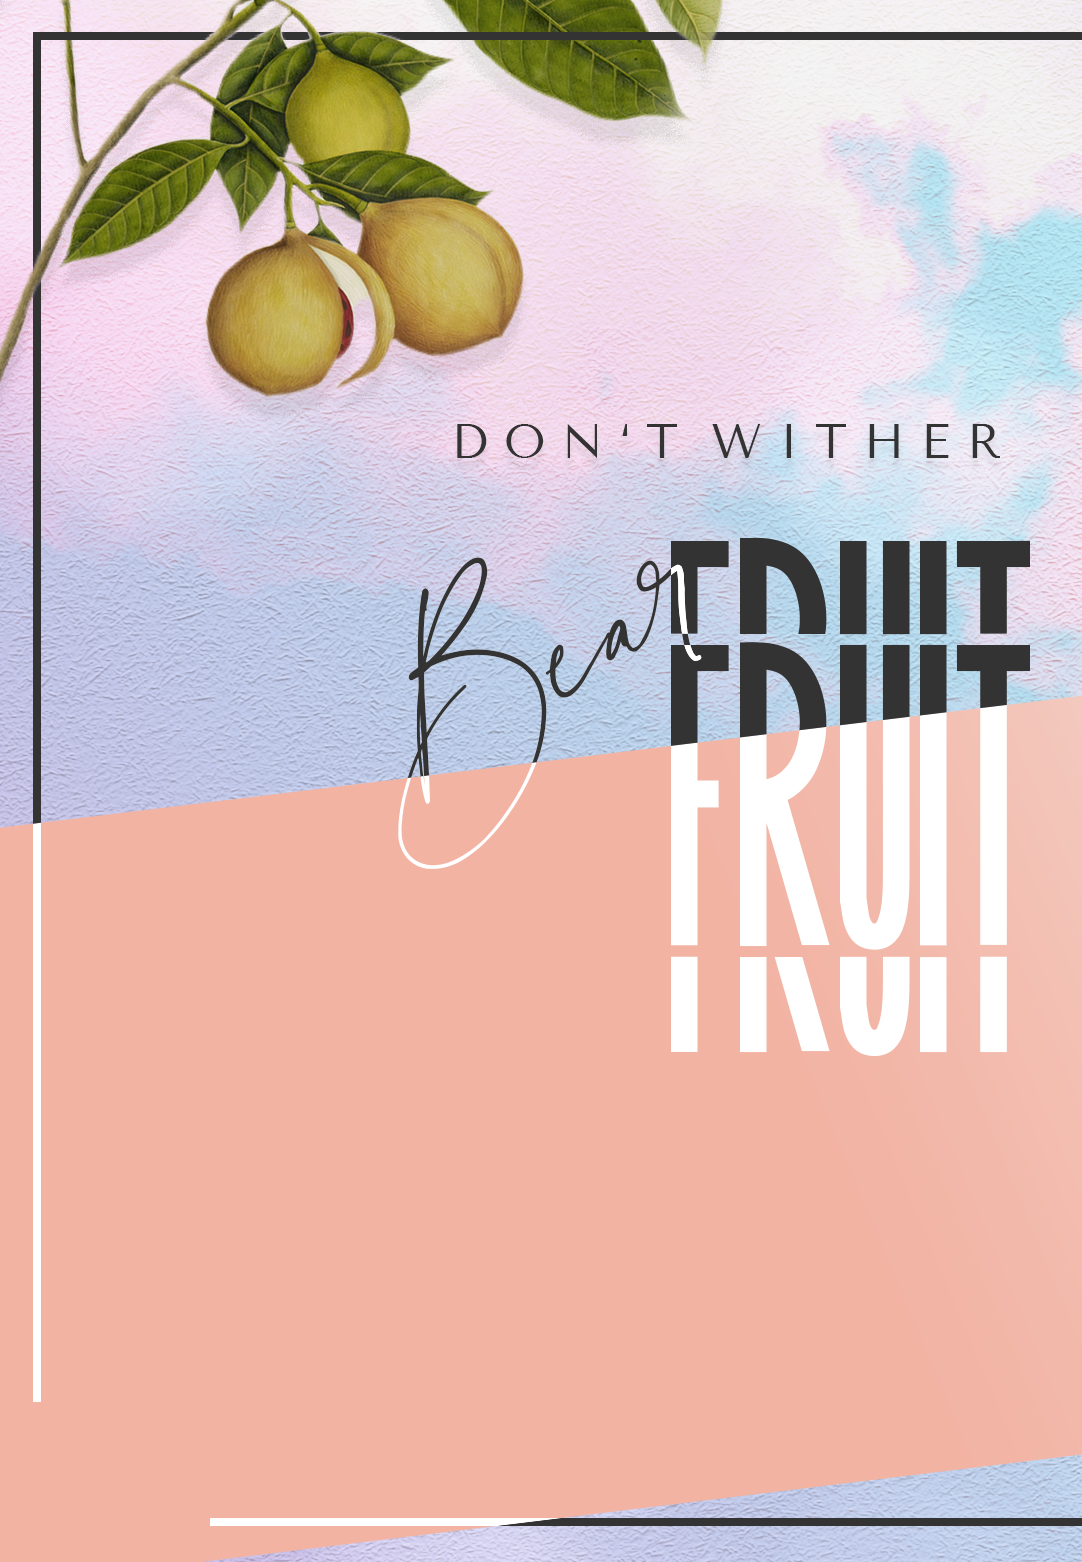 (May Your Life + Ministry) Bear MUCH Fruit // Get Served via Crucifly (Services) \\ Faith-Based Freelancing for Christian Churches, Ministries, Non-Profits, Pastors, Influencers, + more!